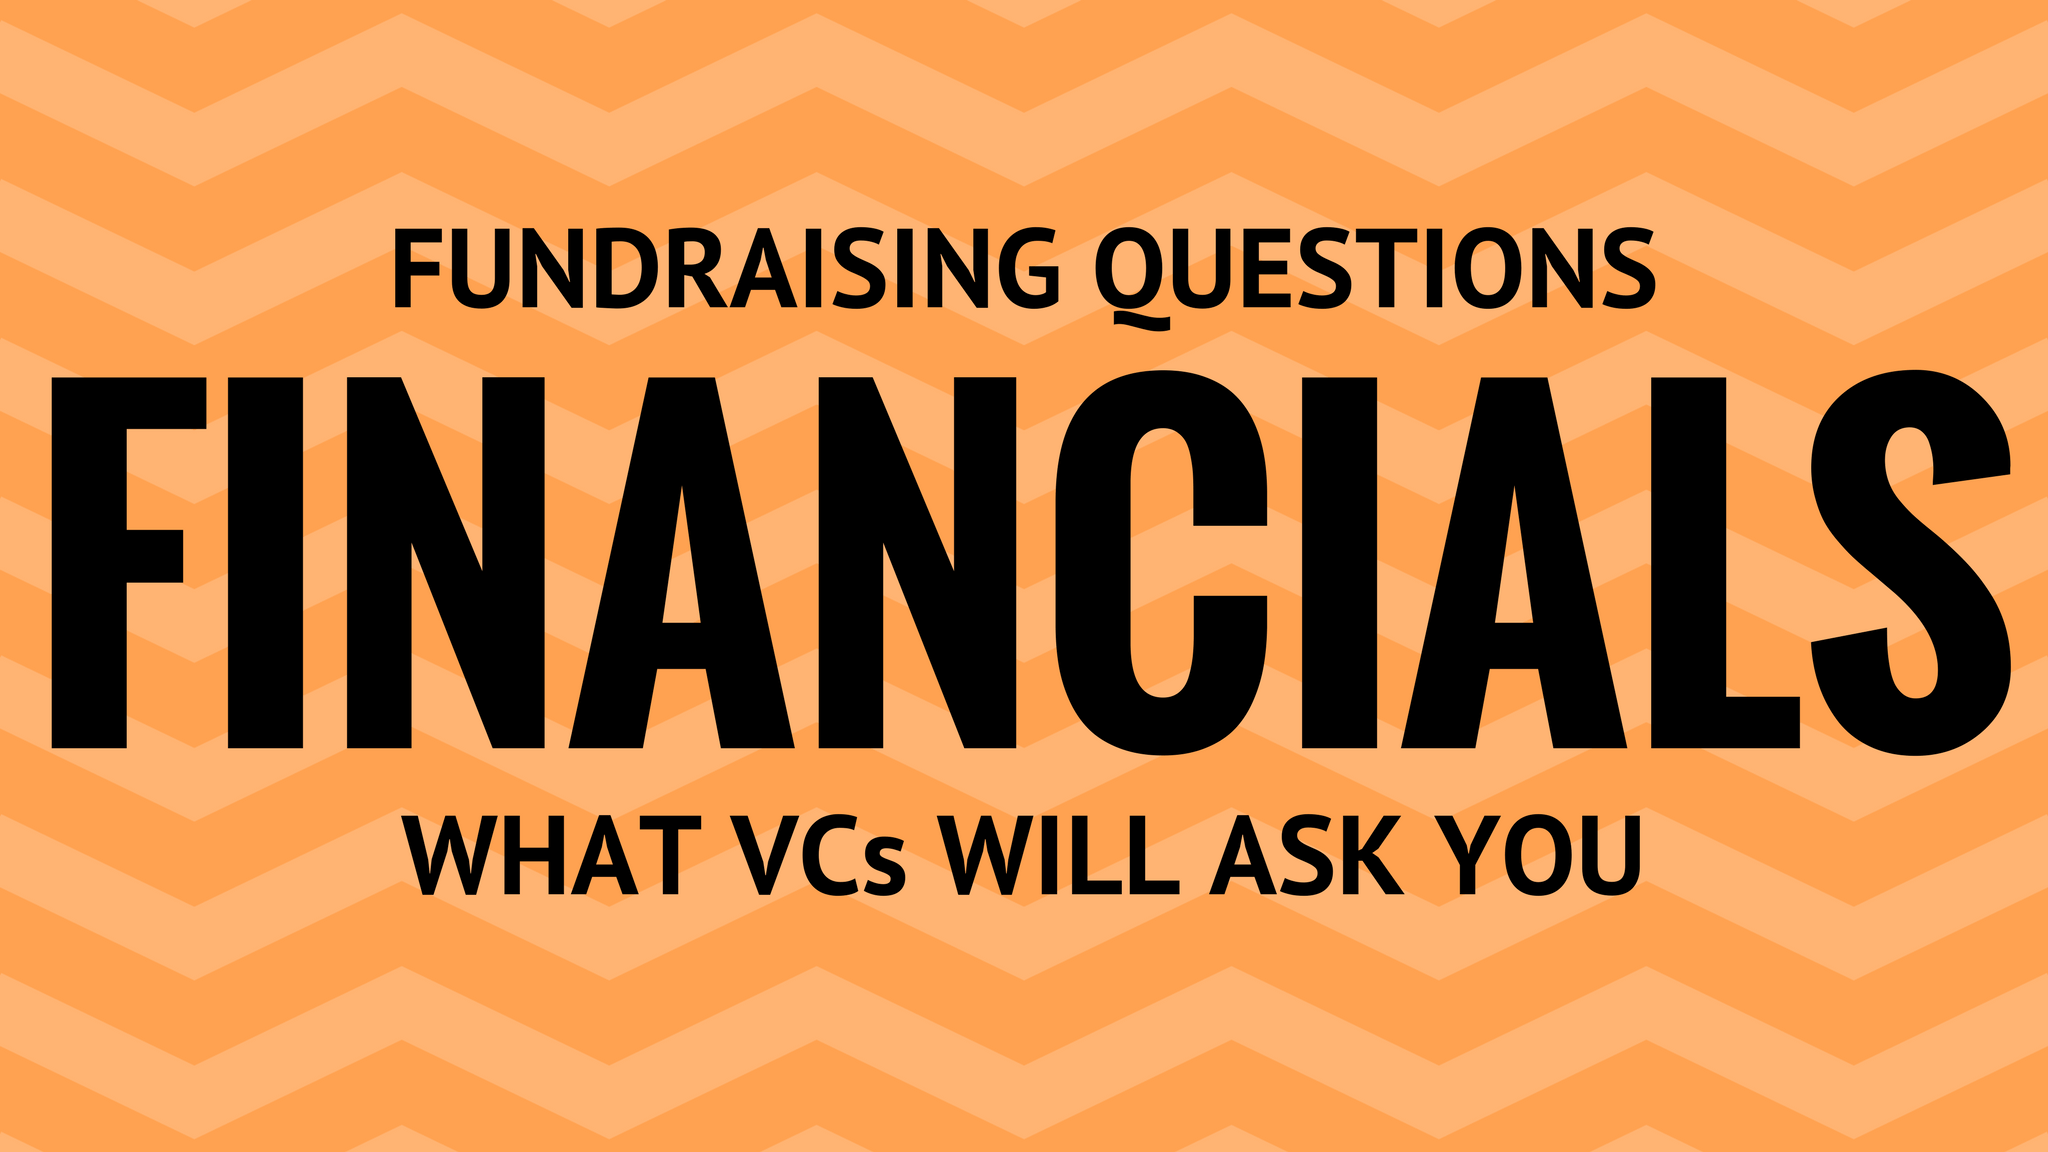 Financial questions for startup fundraising